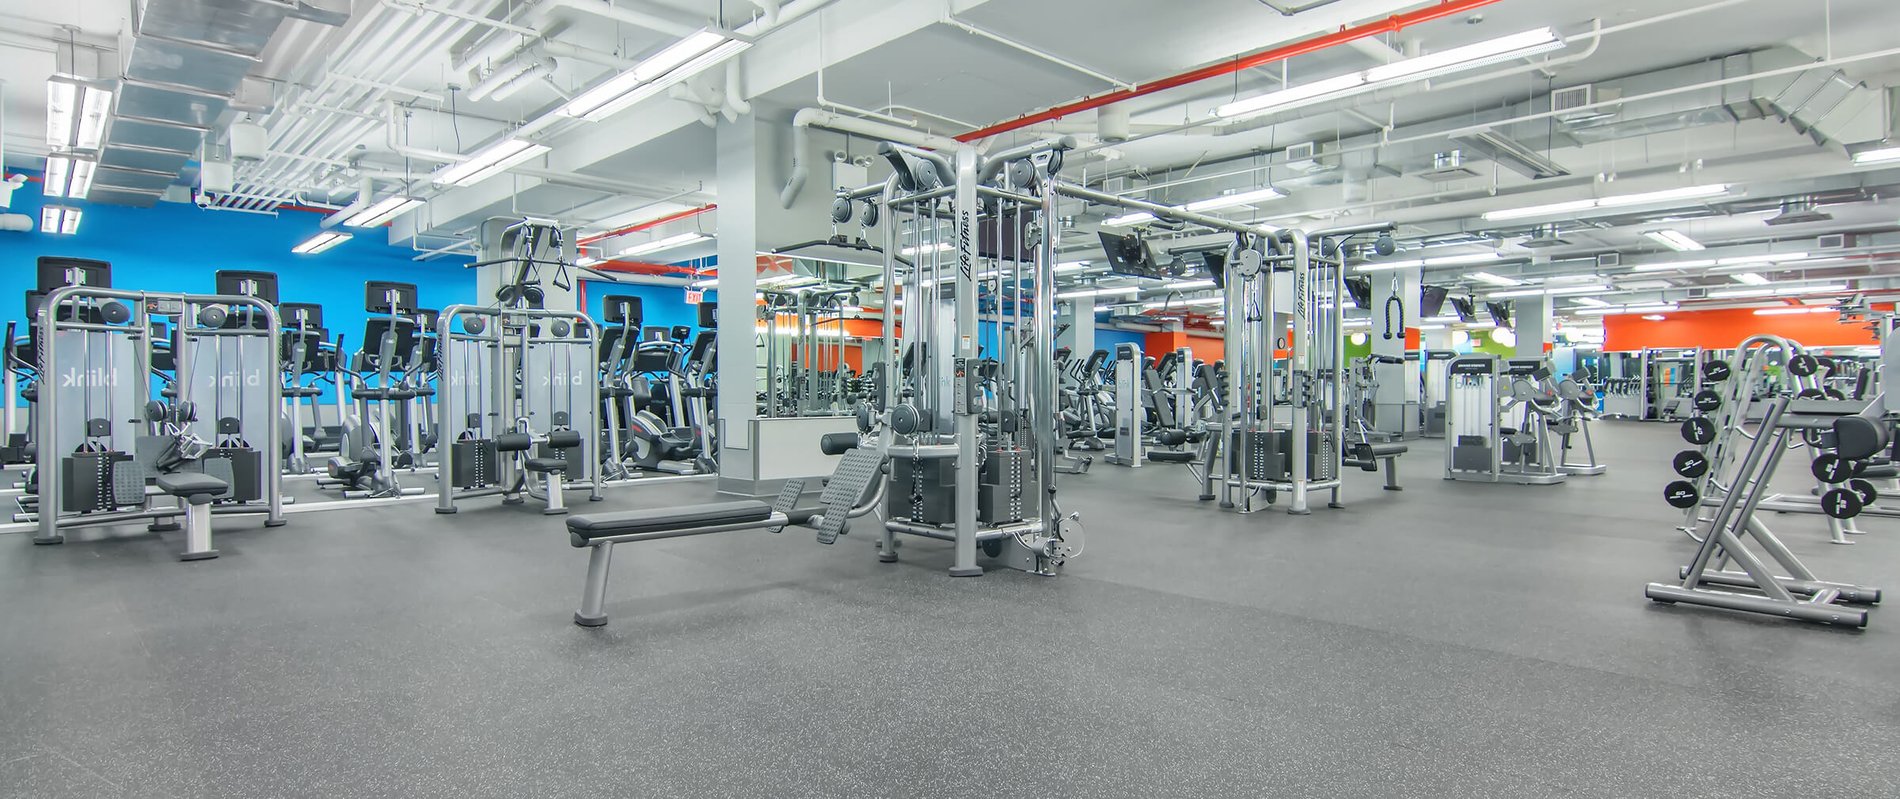 Blink 116th Gym at 116th St, New York, NY | Blink Fitness